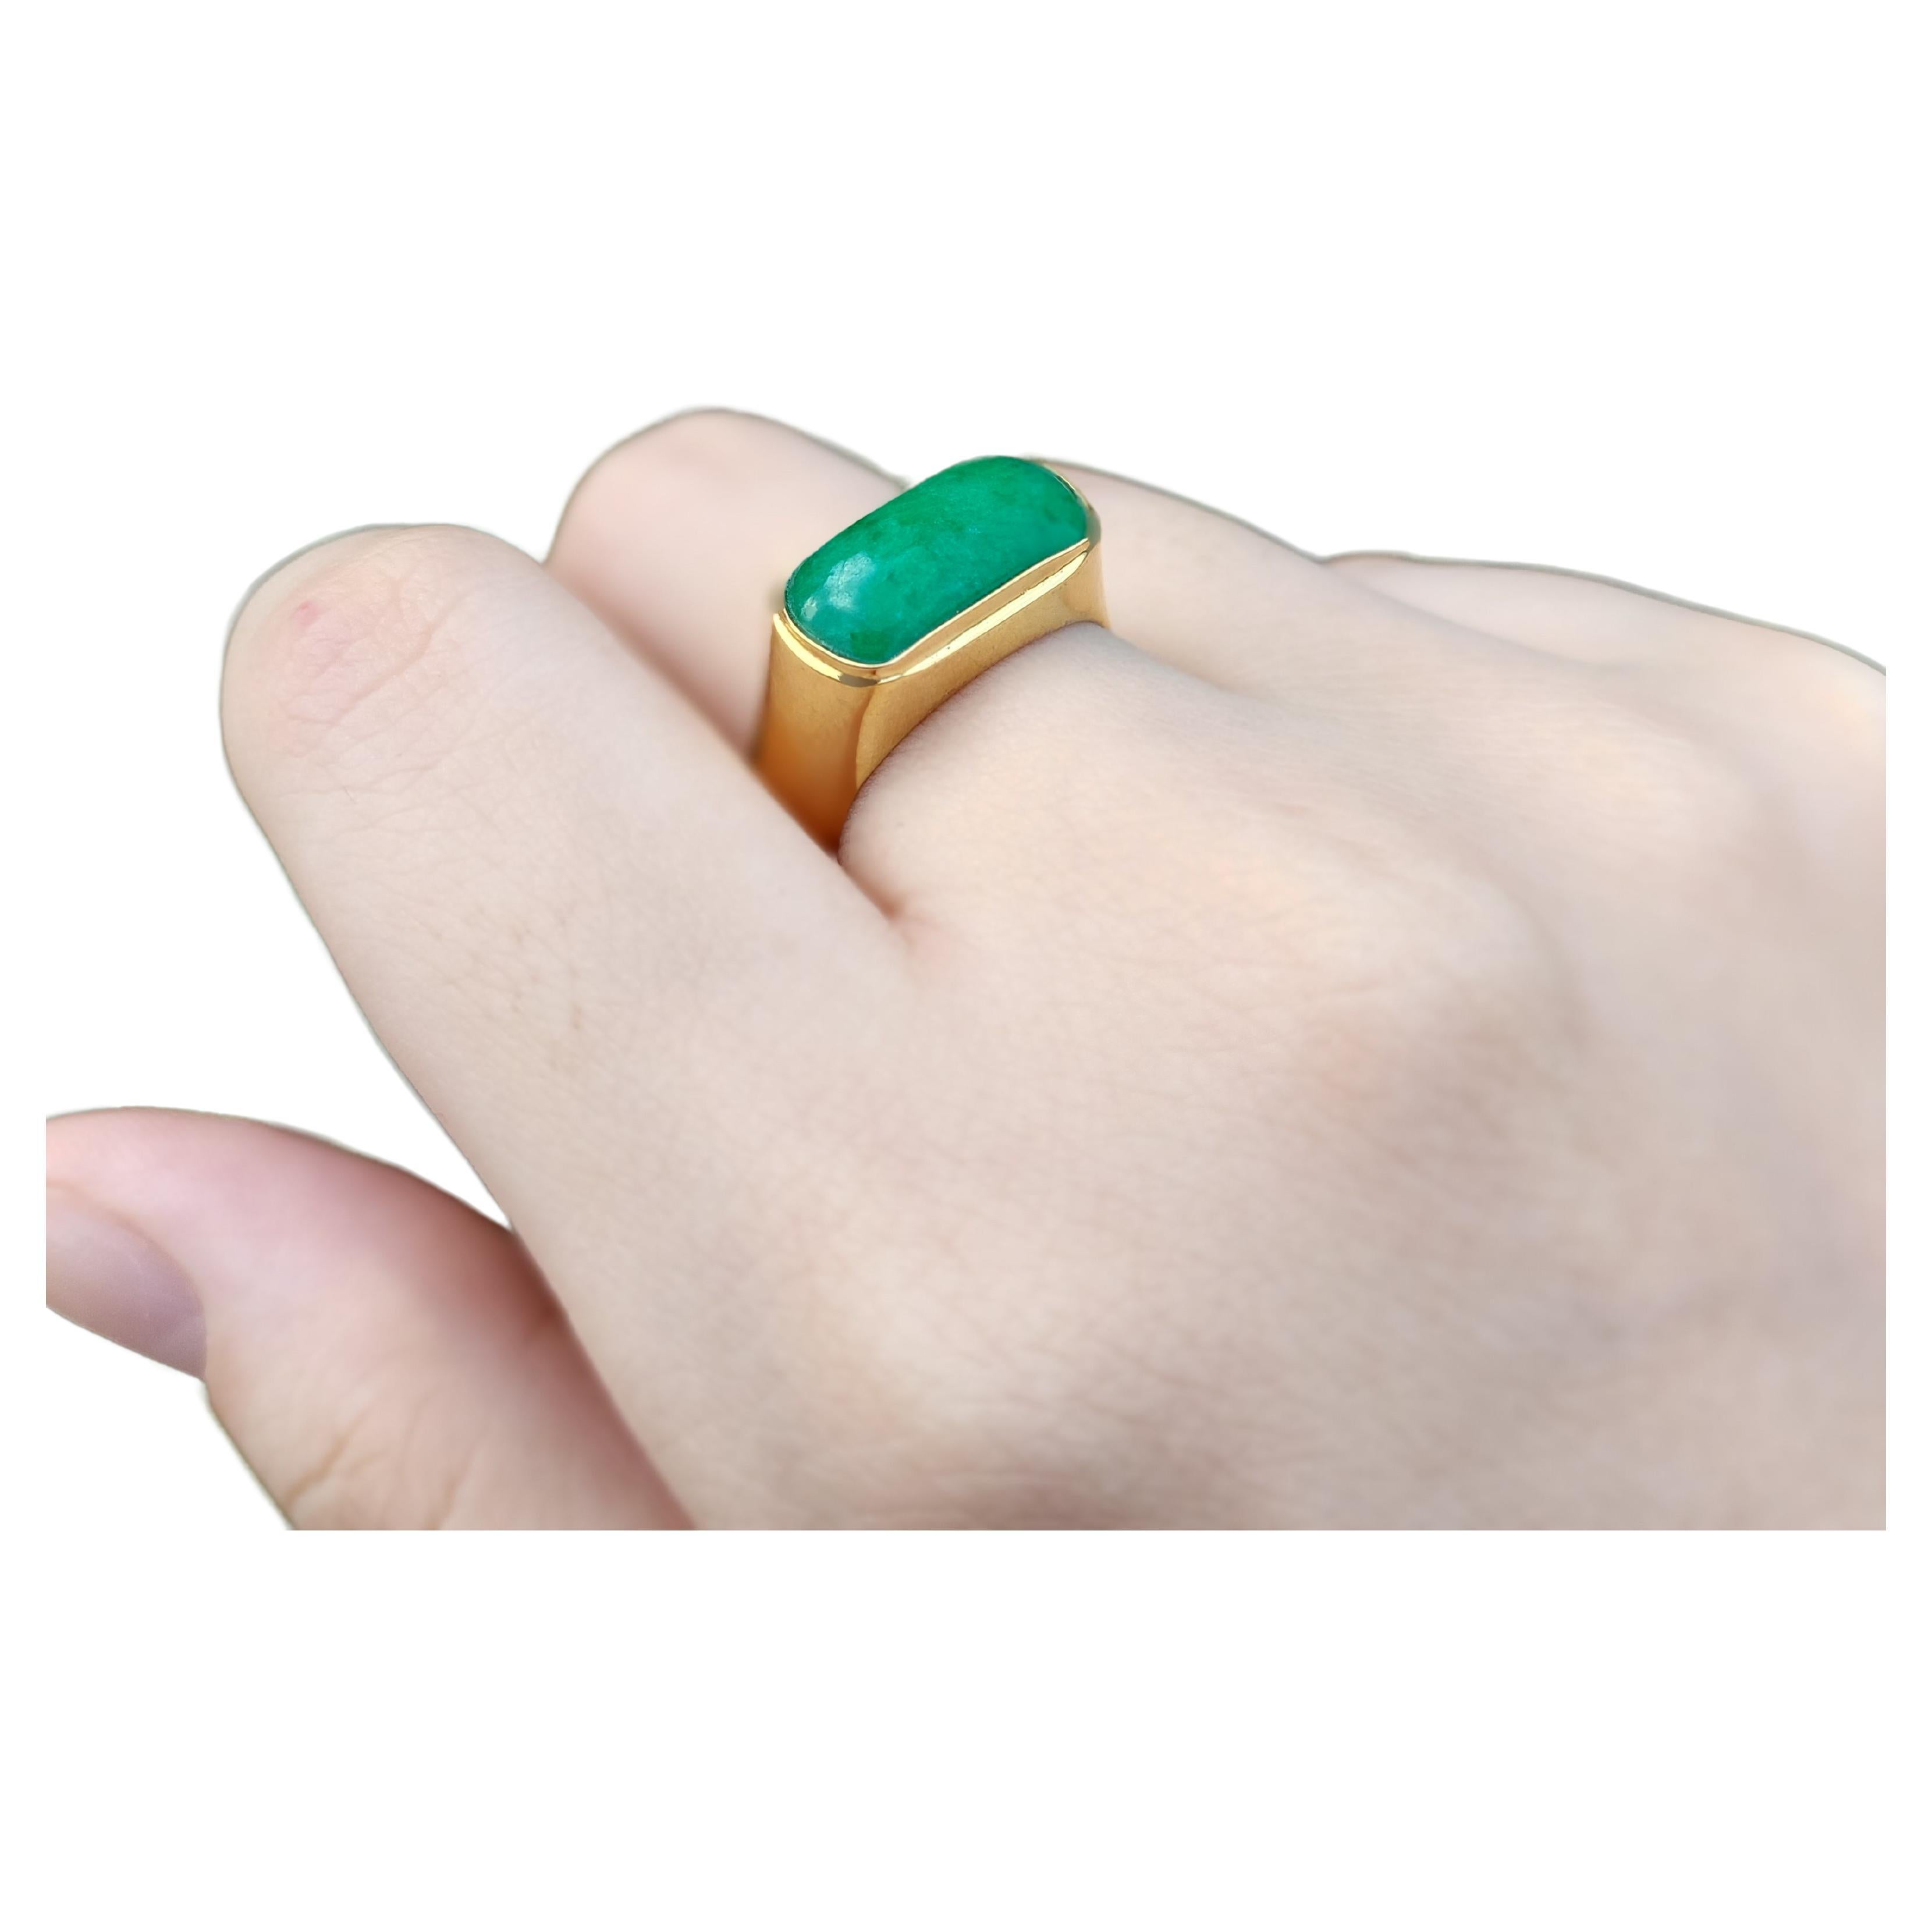 Nanjing Royal Jade Ring with 14K White or Yellow Gold- Cocktail Ring For Sale